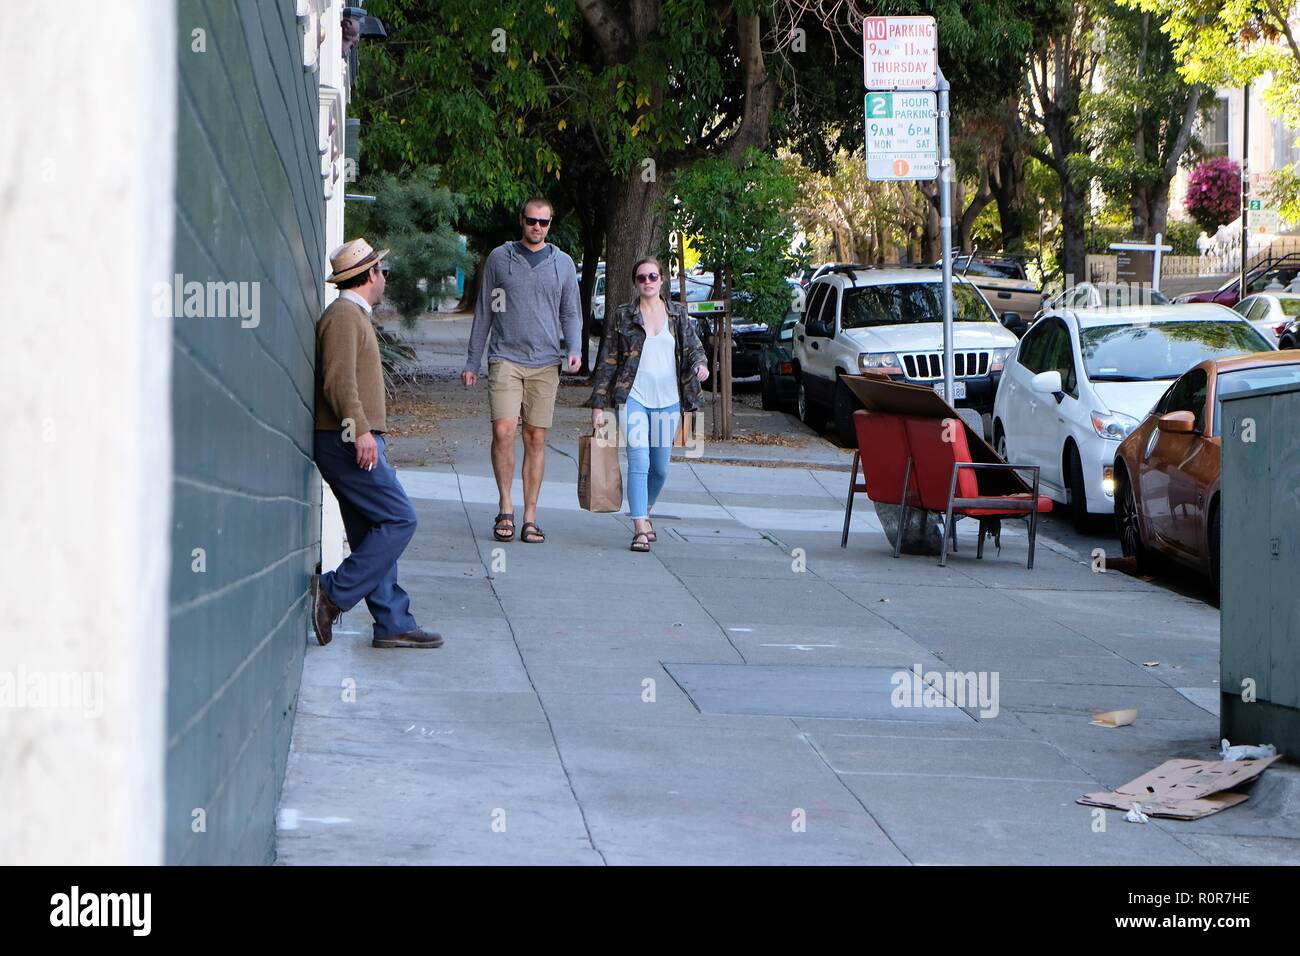 Male / female couple walk down the street as a man with a cigarette reclined against a wall observes them walking in his direction; street scene. Stock Photo